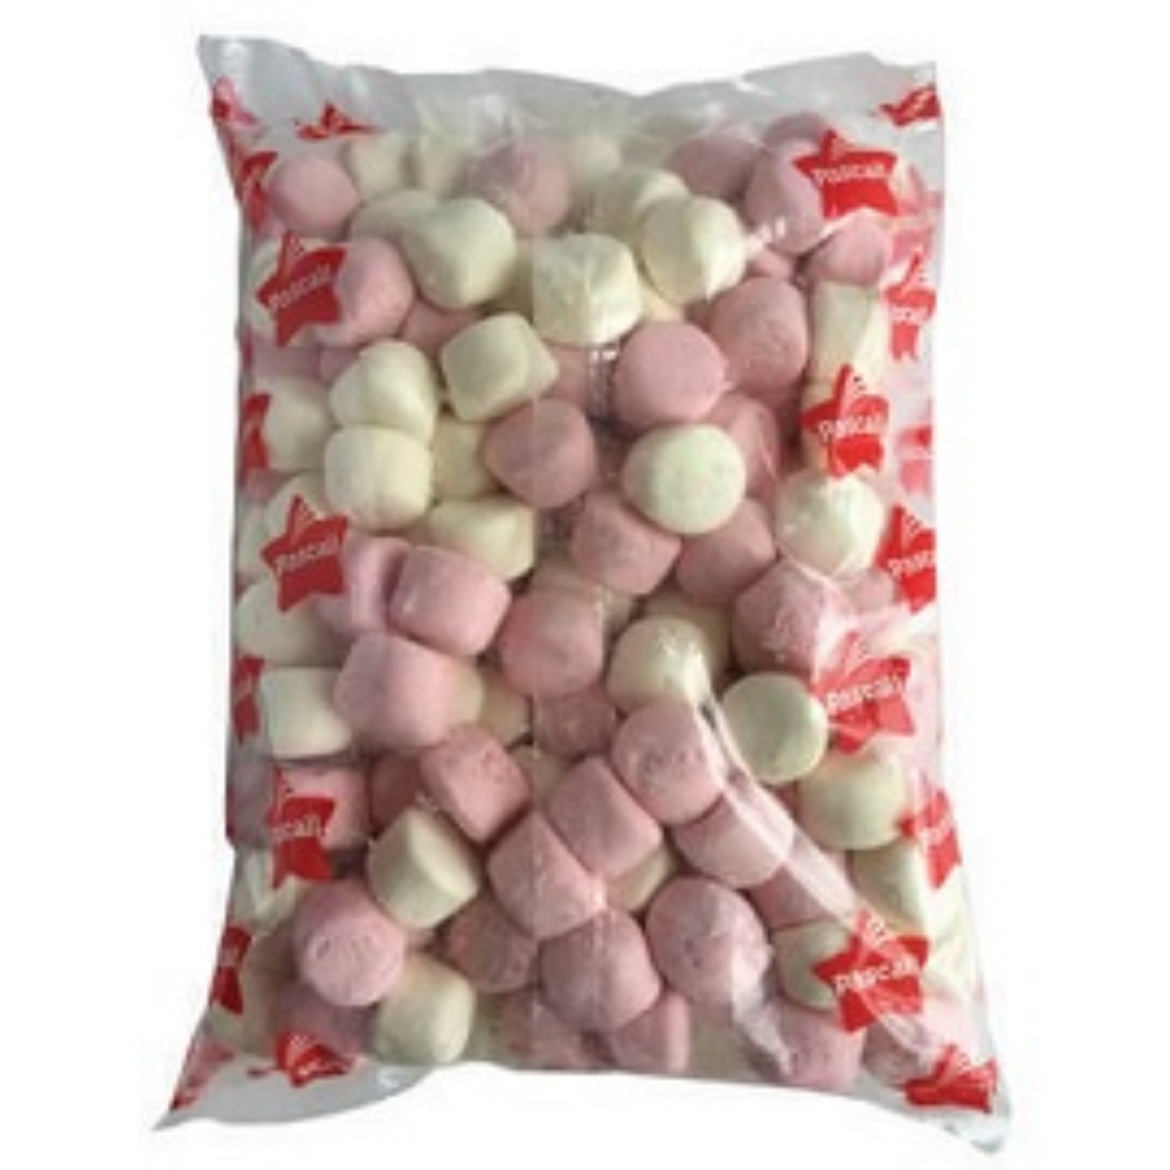 Picture of 1KG PASCALLS MARSHMALLOWS WHITE/PINK